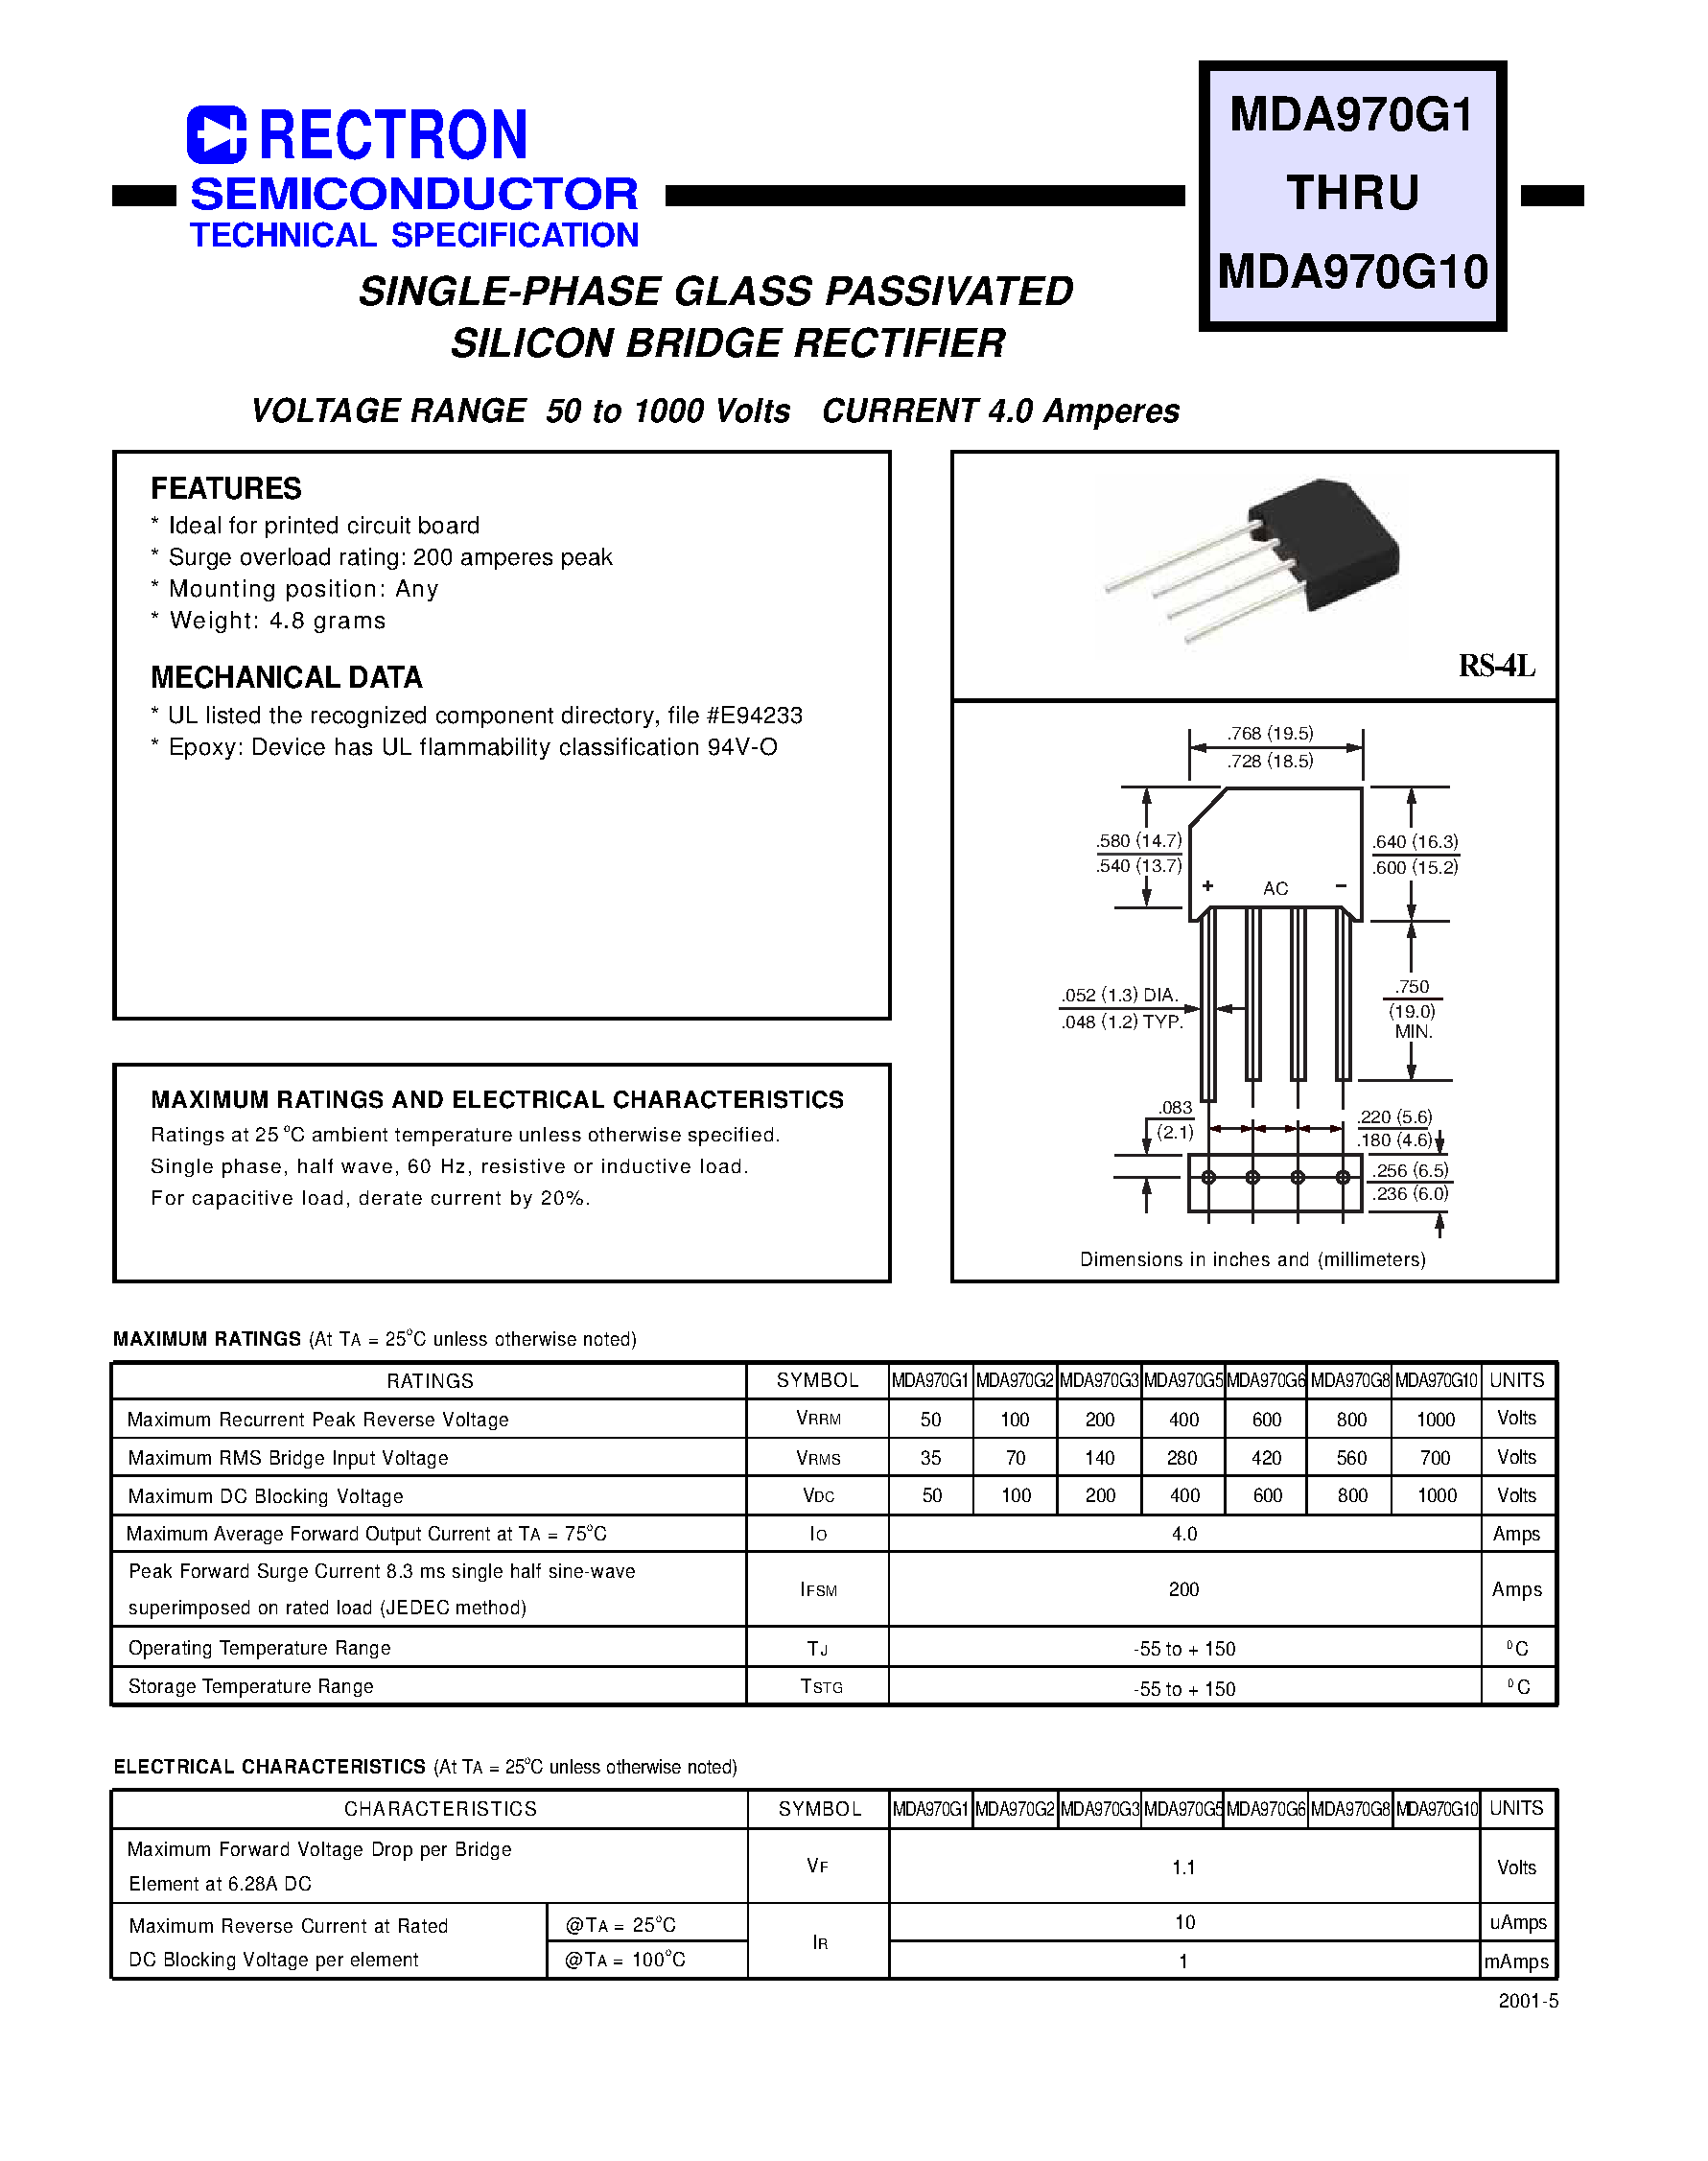 Даташит MDA970G6 - SINGLE-PHASE GLASS PASSIVATED SILICON BRIDGE RECTIFIER (VOLTAGE RANGE 50 to 1000 Volts CURRENT 4.0 Amperes) страница 1